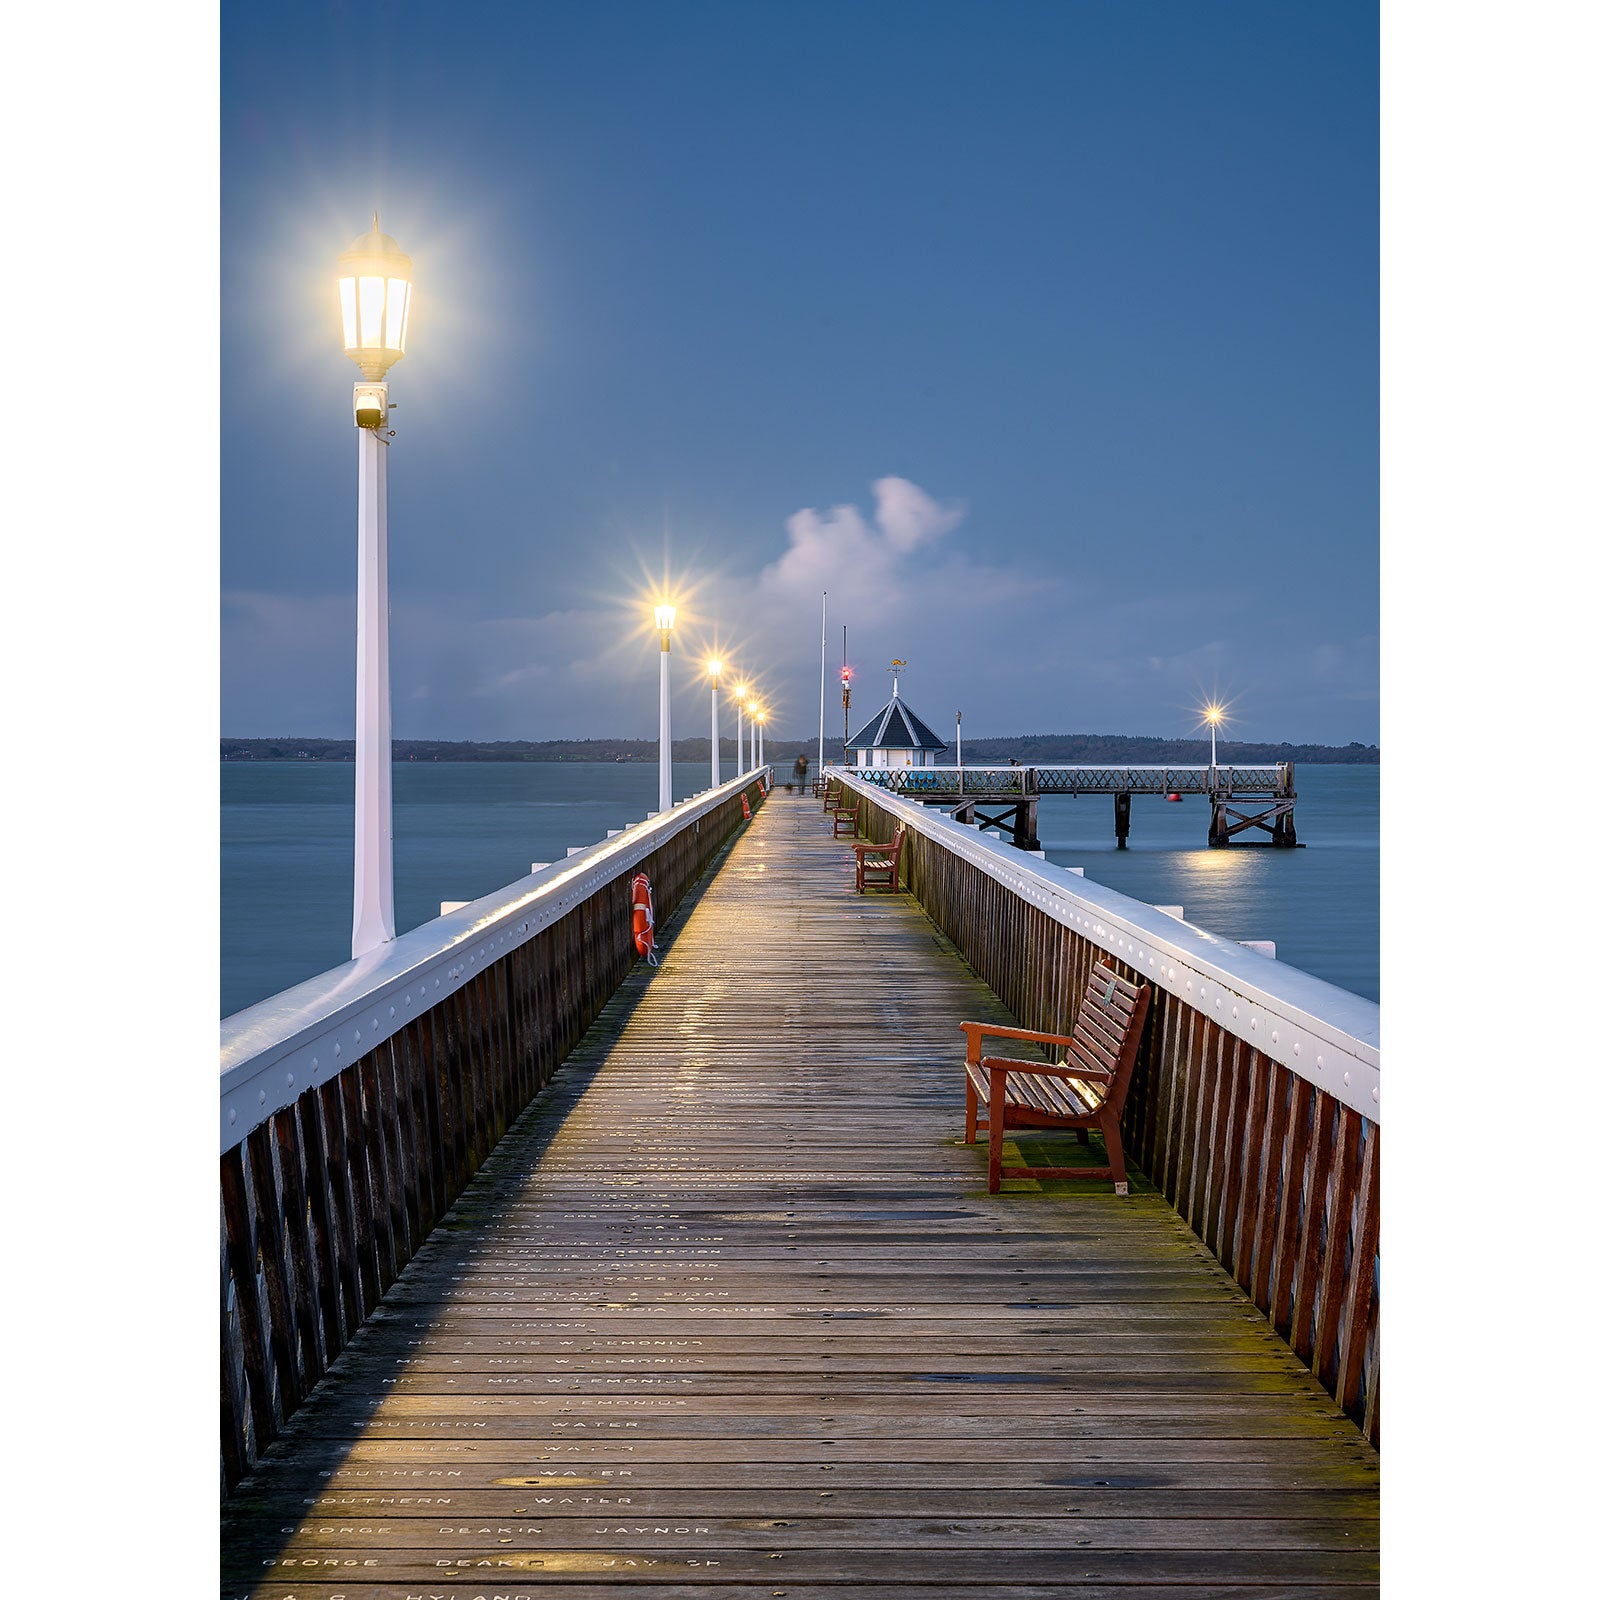 Lamps illuminate Yarmouth Pier with benches leading towards a small dock on Gascoigne Isle at dusk. (Available Light Photography)